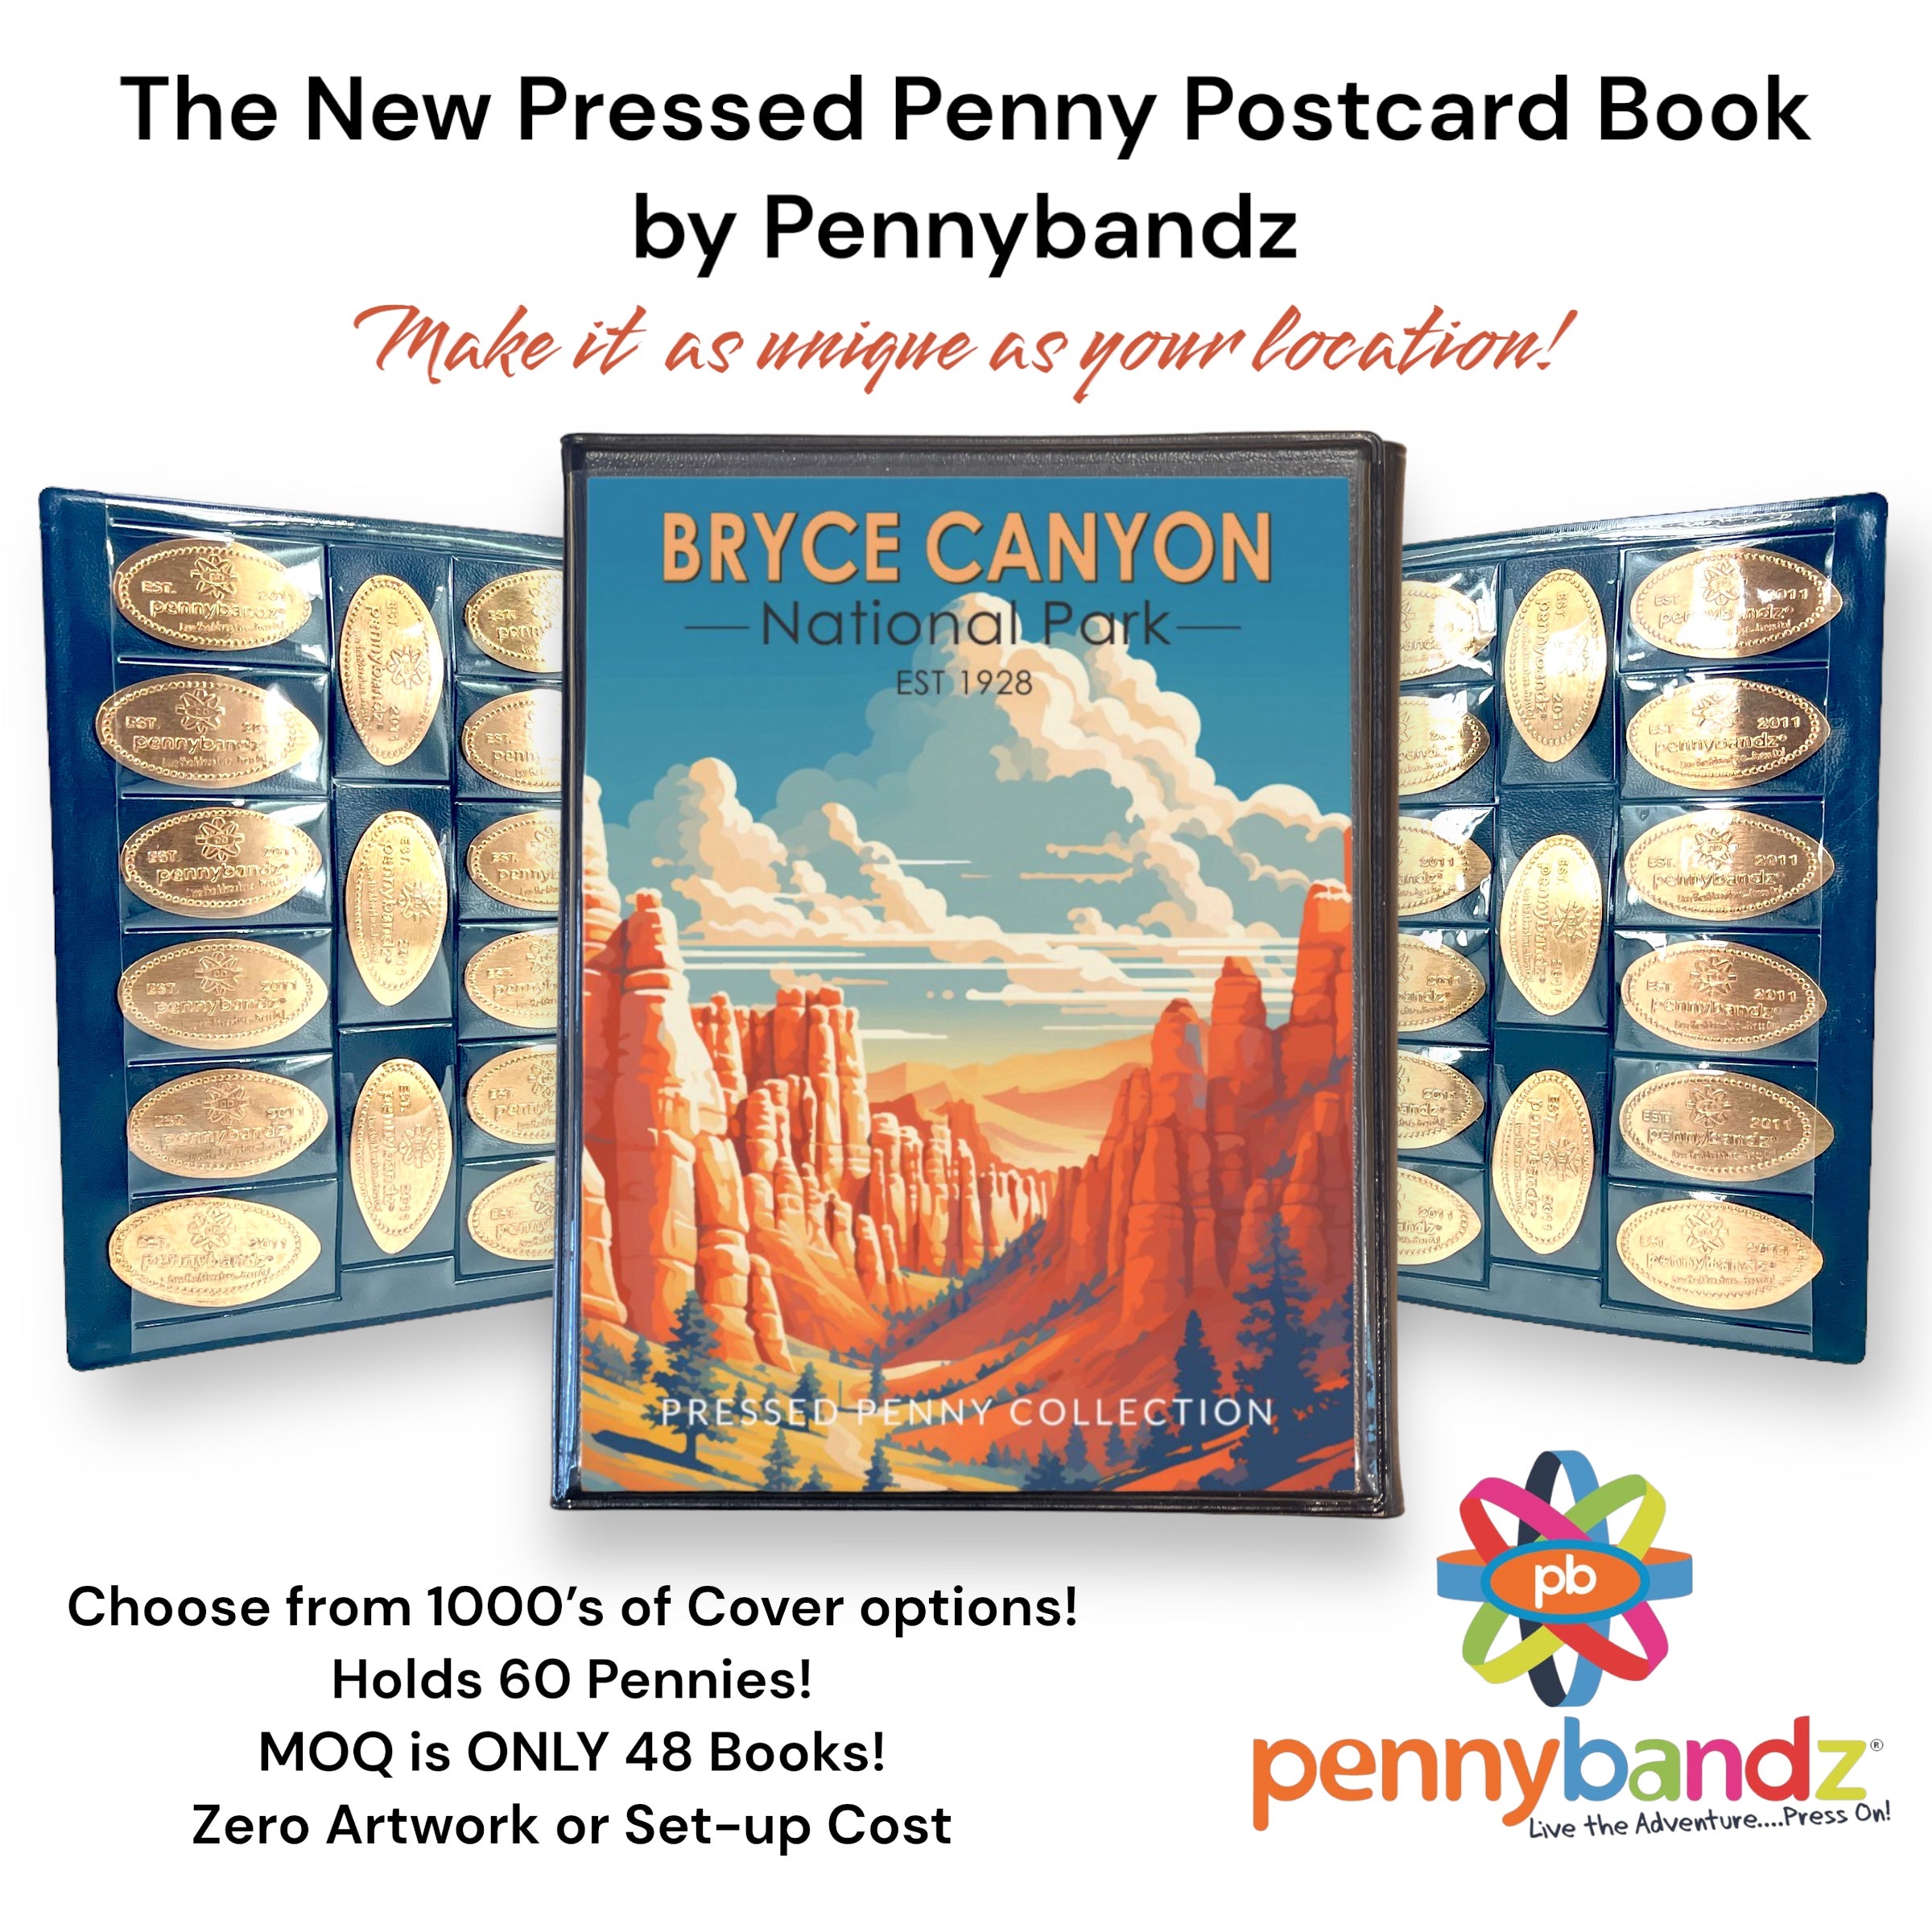  Pennybandz Press Penny Collector Tri-Fold Album - Holds 48 Souvenir  Pressed Pennies - Vegan Leather - Every Book Ordered Comes with a Mystery  Penny as a Gift (Great American Penny Adventure) 